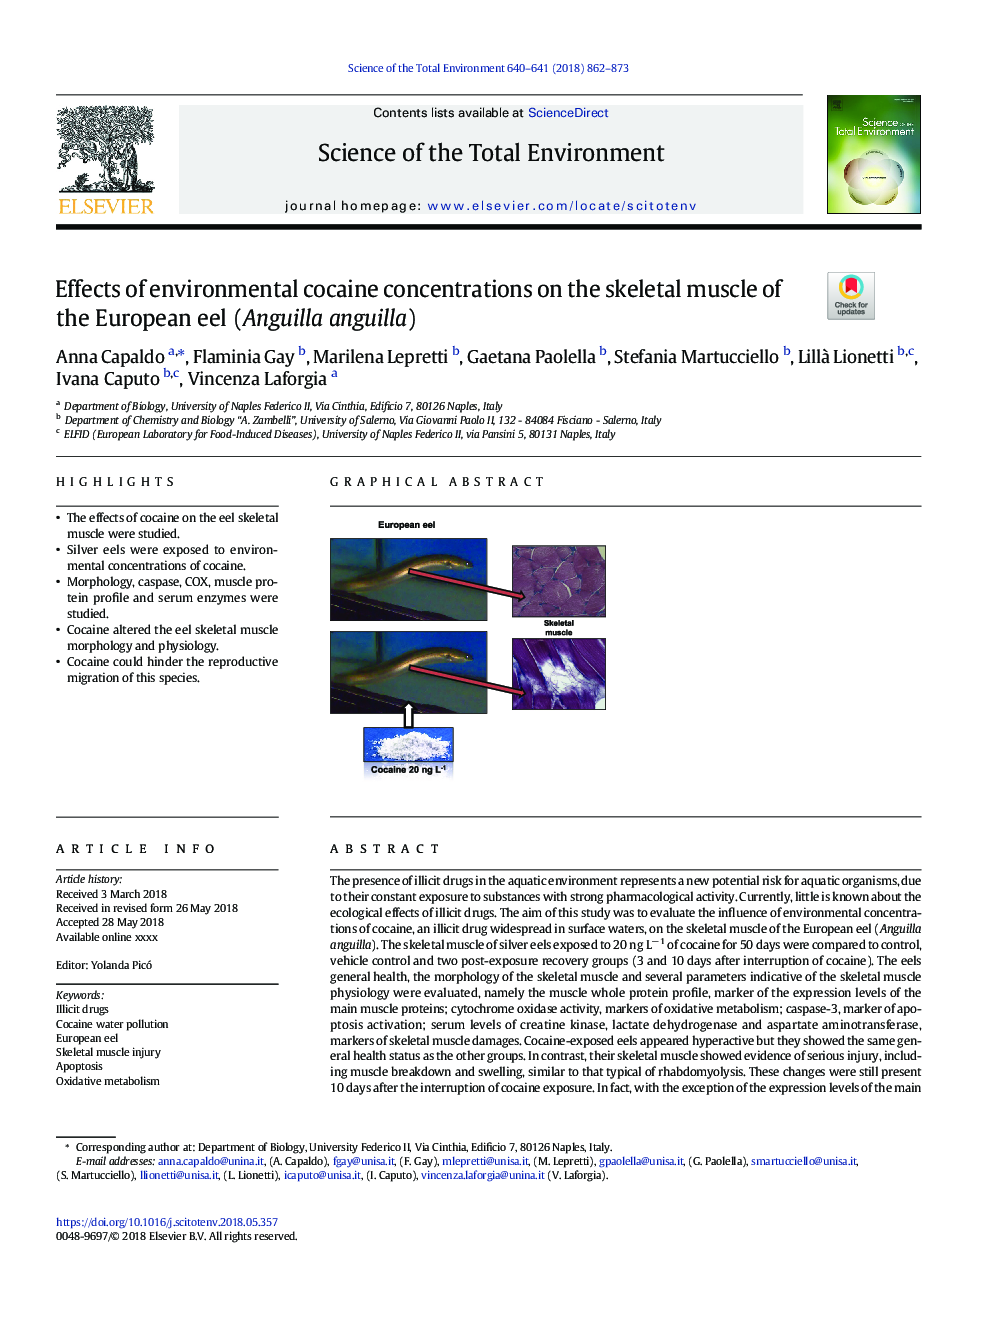 Effects of environmental cocaine concentrations on the skeletal muscle of the European eel (Anguilla anguilla)